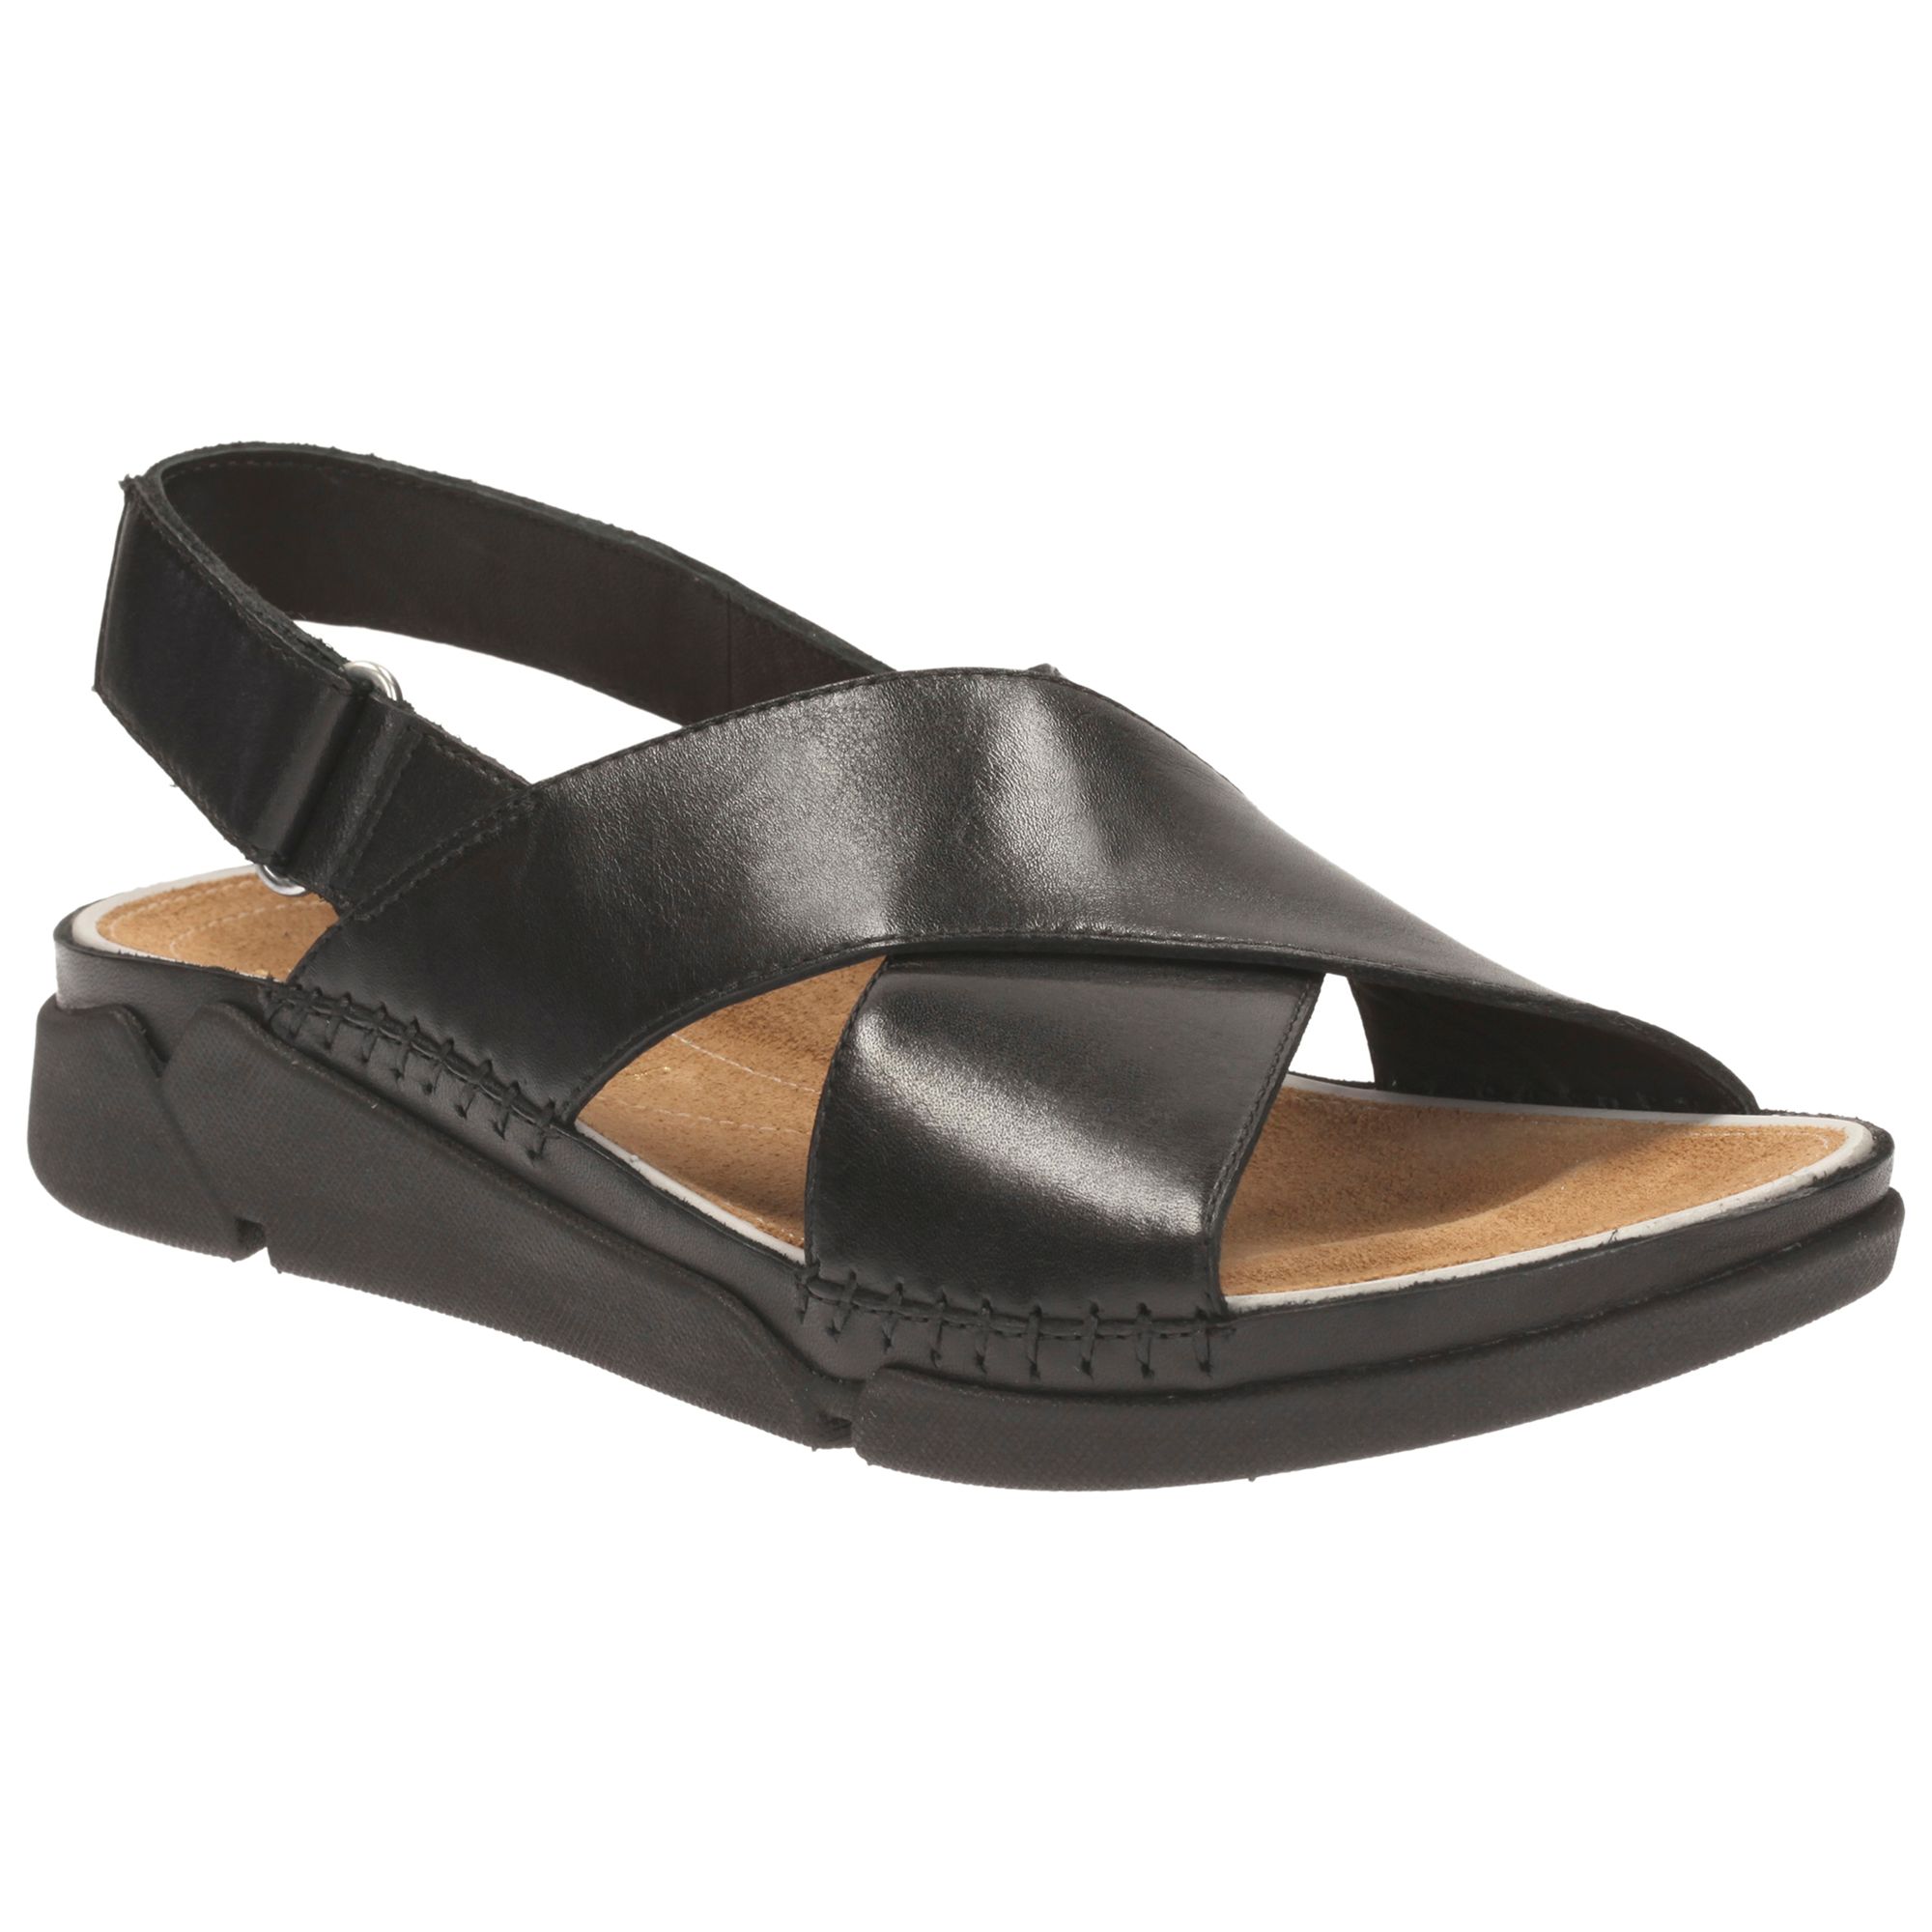 Clarks Tri Alexia Leather Sandals at John Lewis & Partners